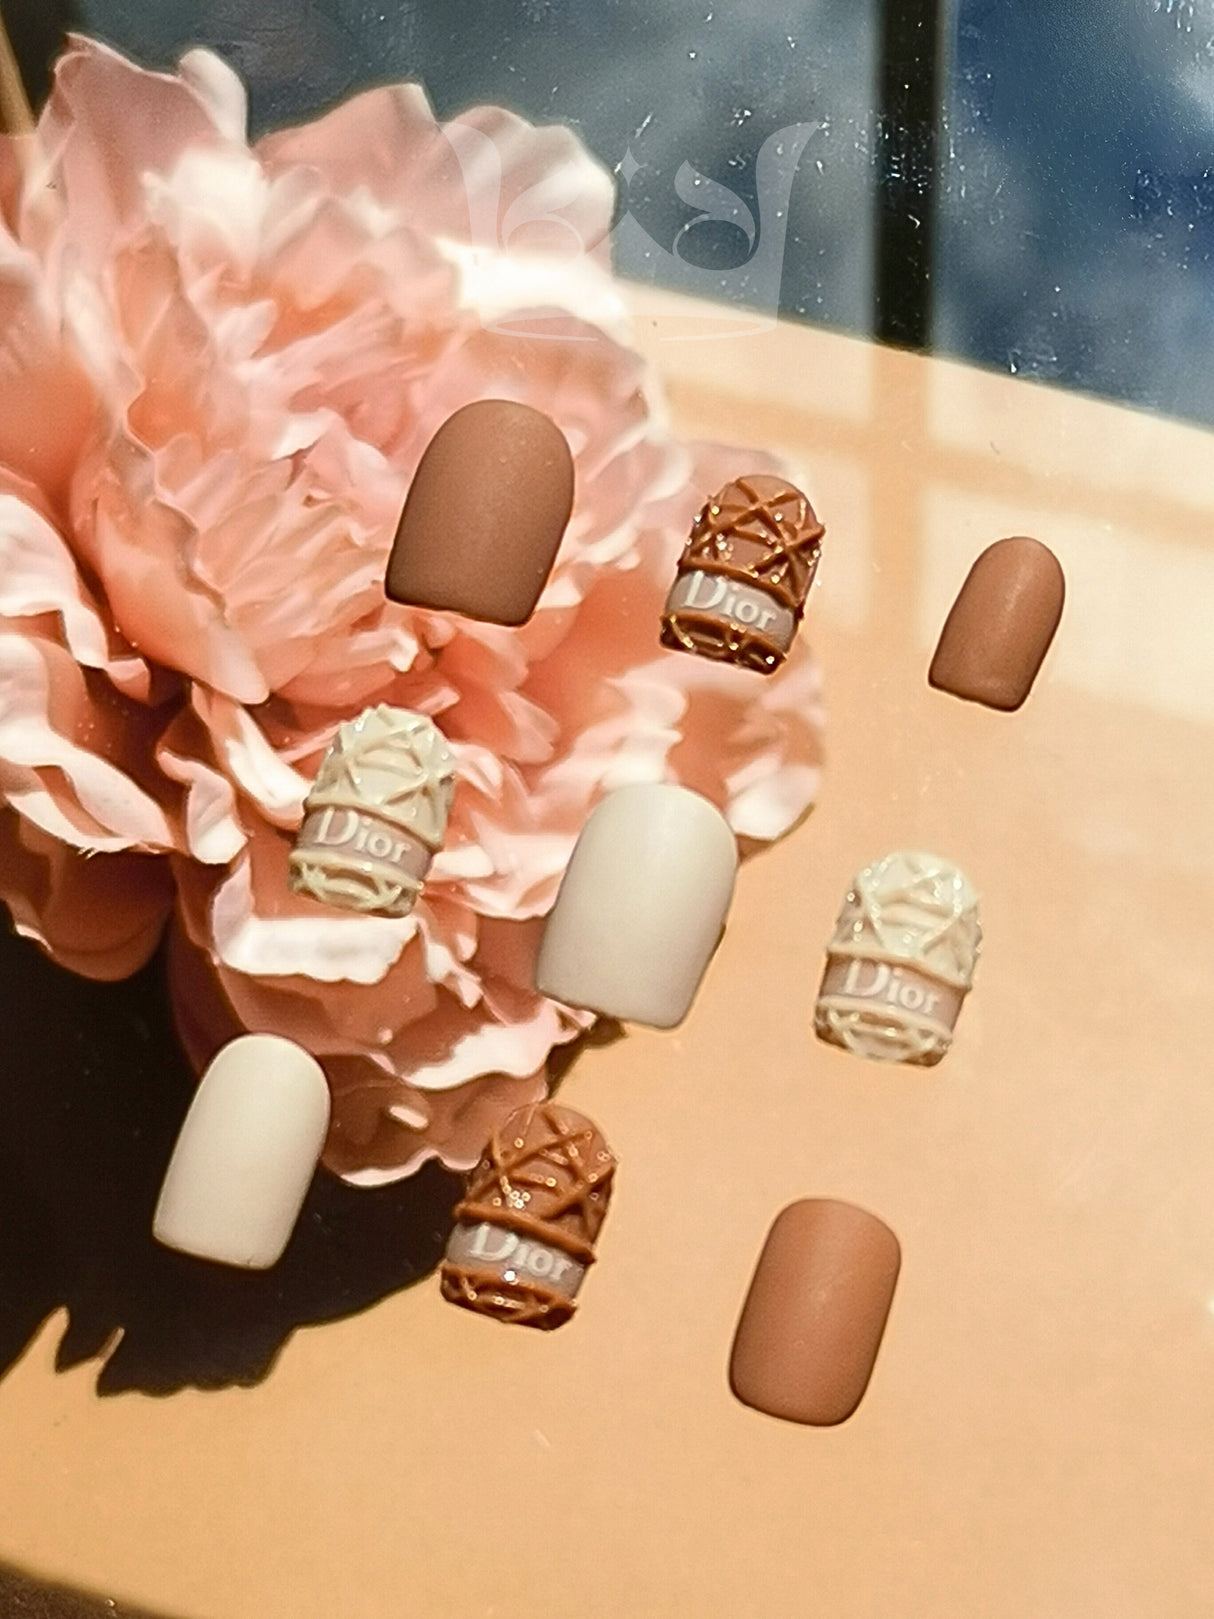 Dior nails are a luxurious fashion accessory suitable for special occasions, with branded embellishments and design elements for a fancy look.